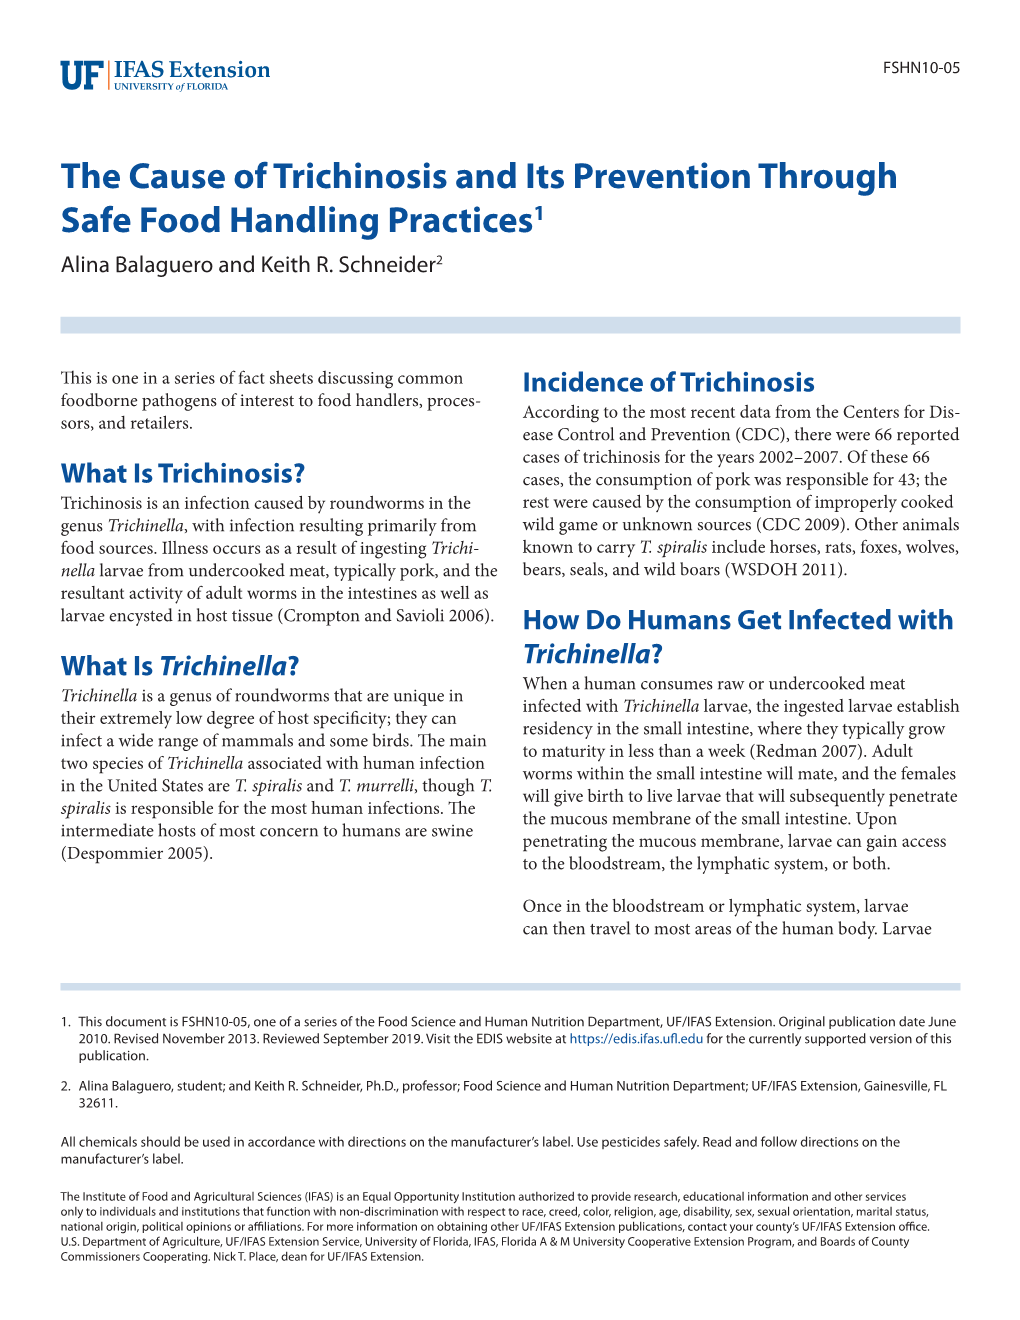 The Cause of Trichinosis and Its Prevention Through Safe Food Handling Practices1 Alina Balaguero and Keith R